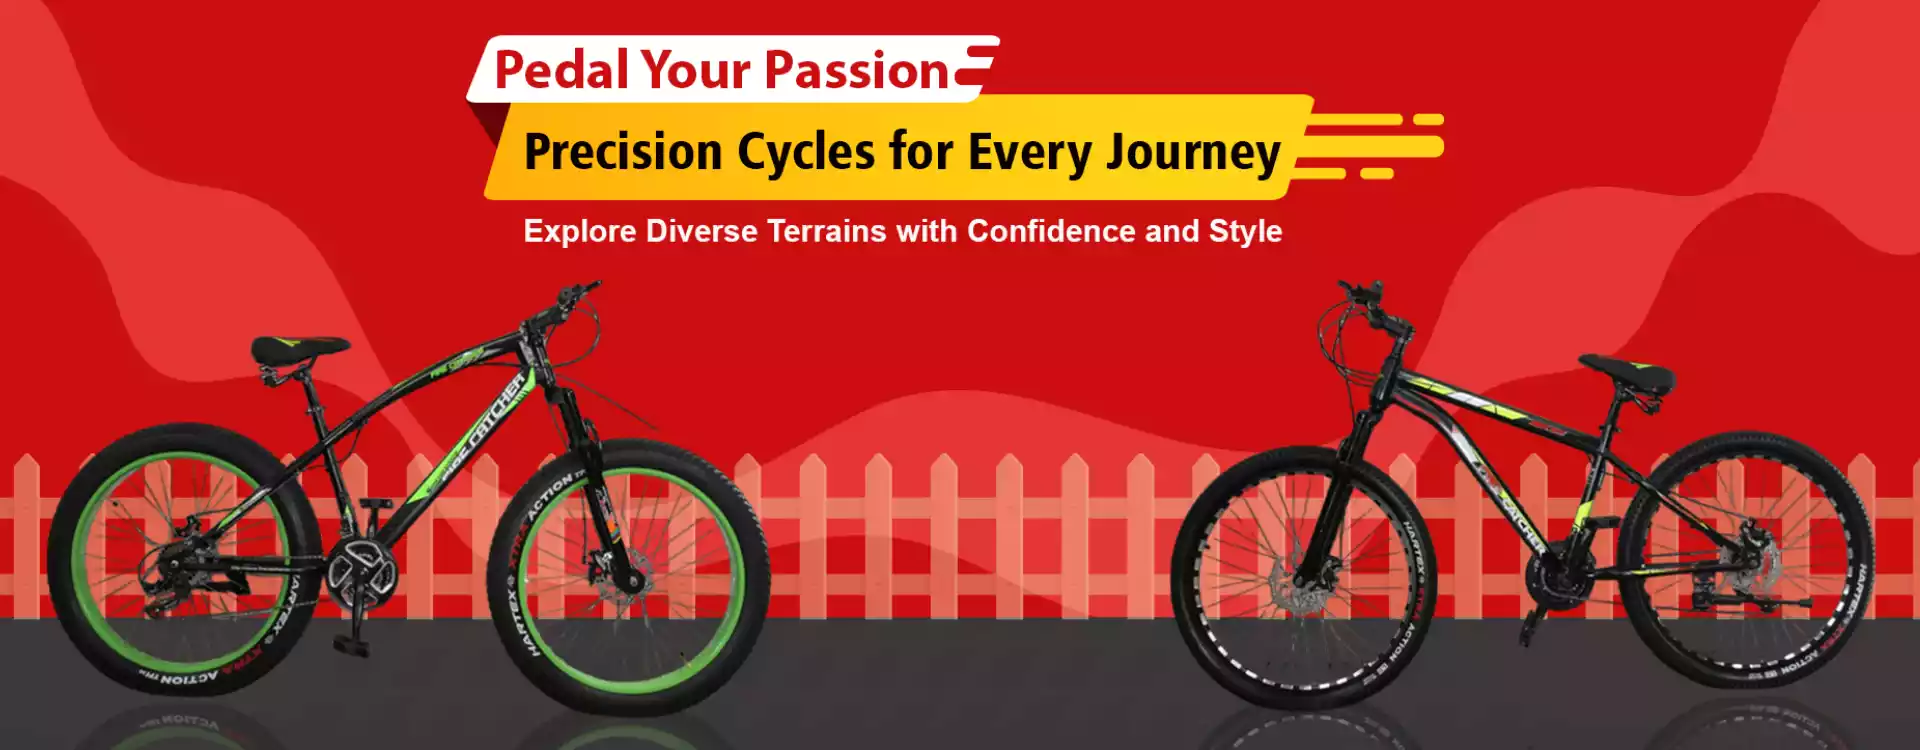 Full Suspension Bicycle Manufacturers Providing Quality and Innovation